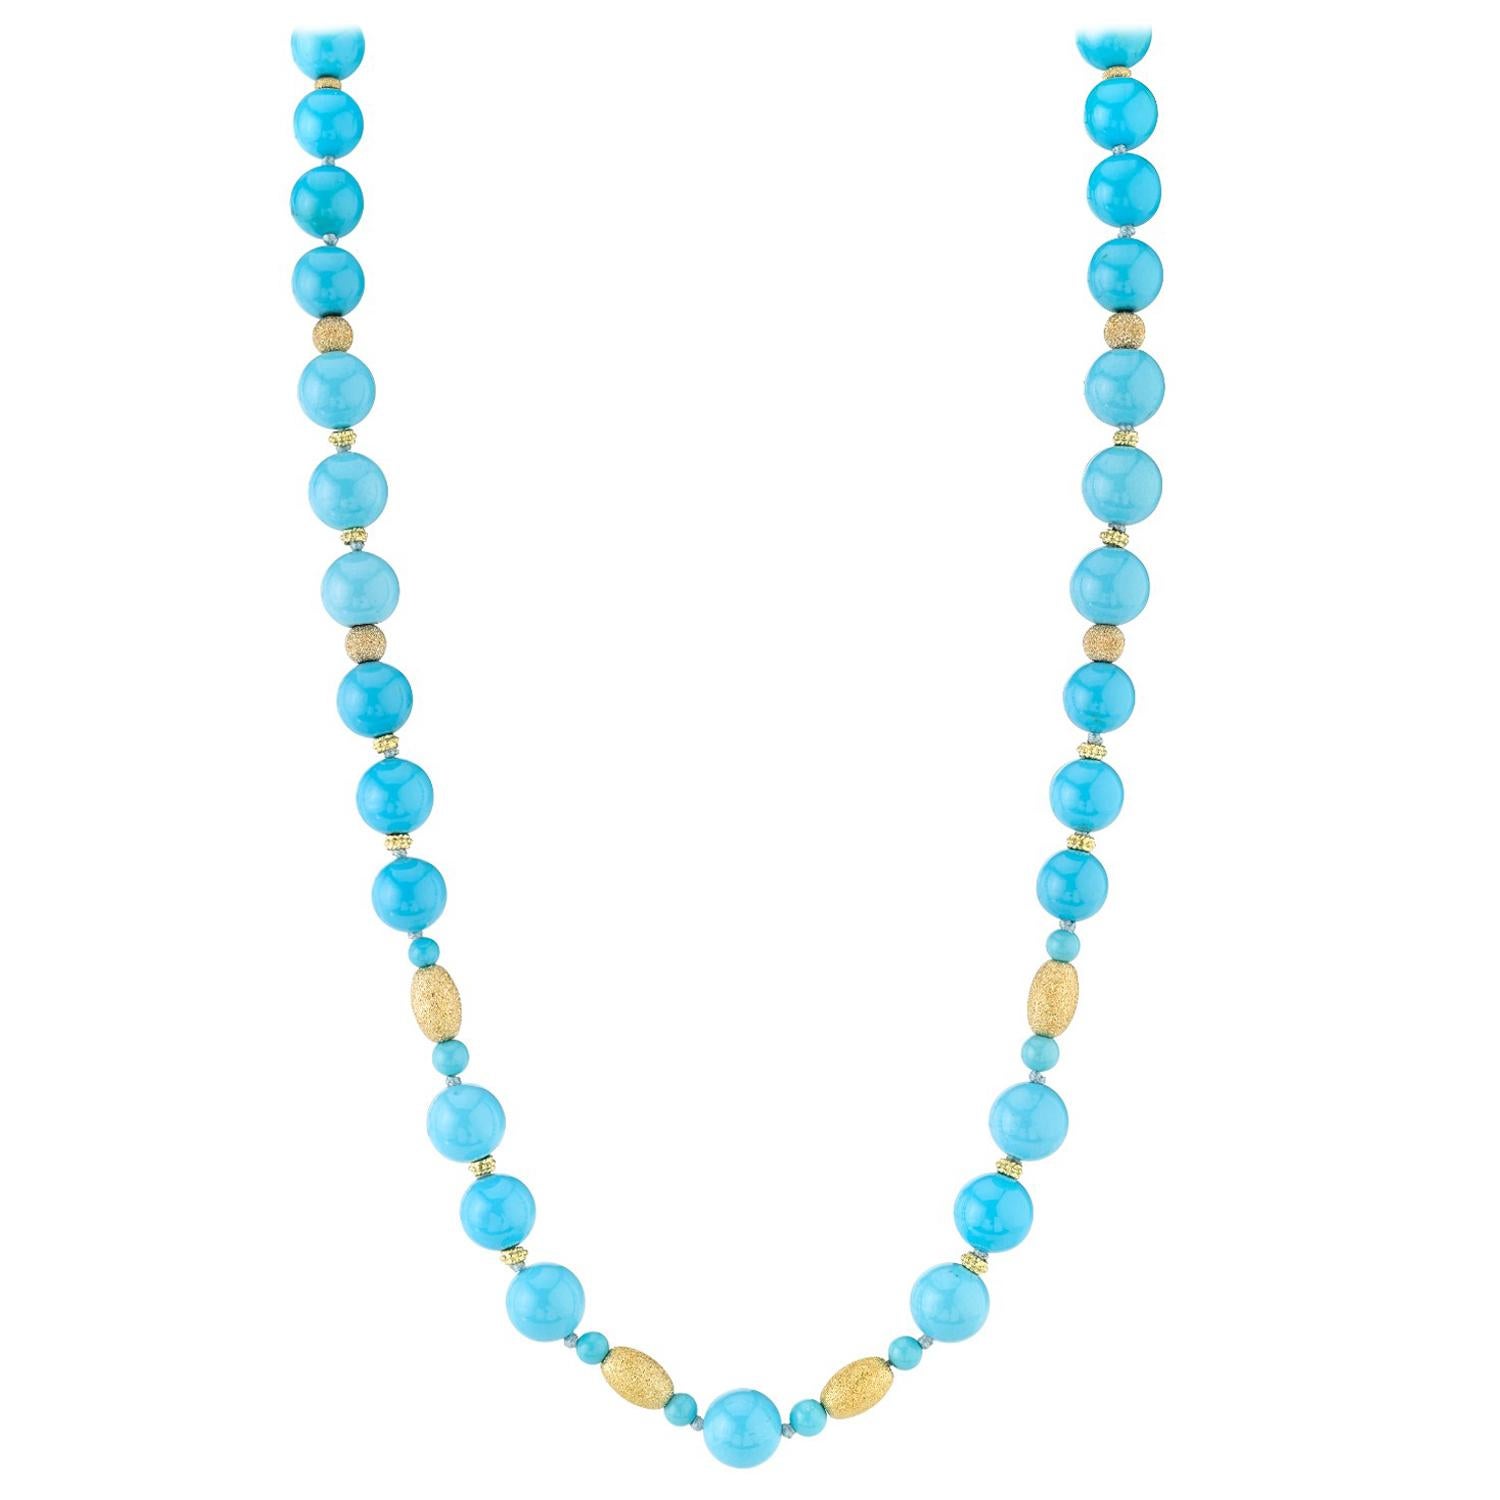 9.50mm Sleeping Beauty Mine Turquoise Beads with 14k Gold Accents